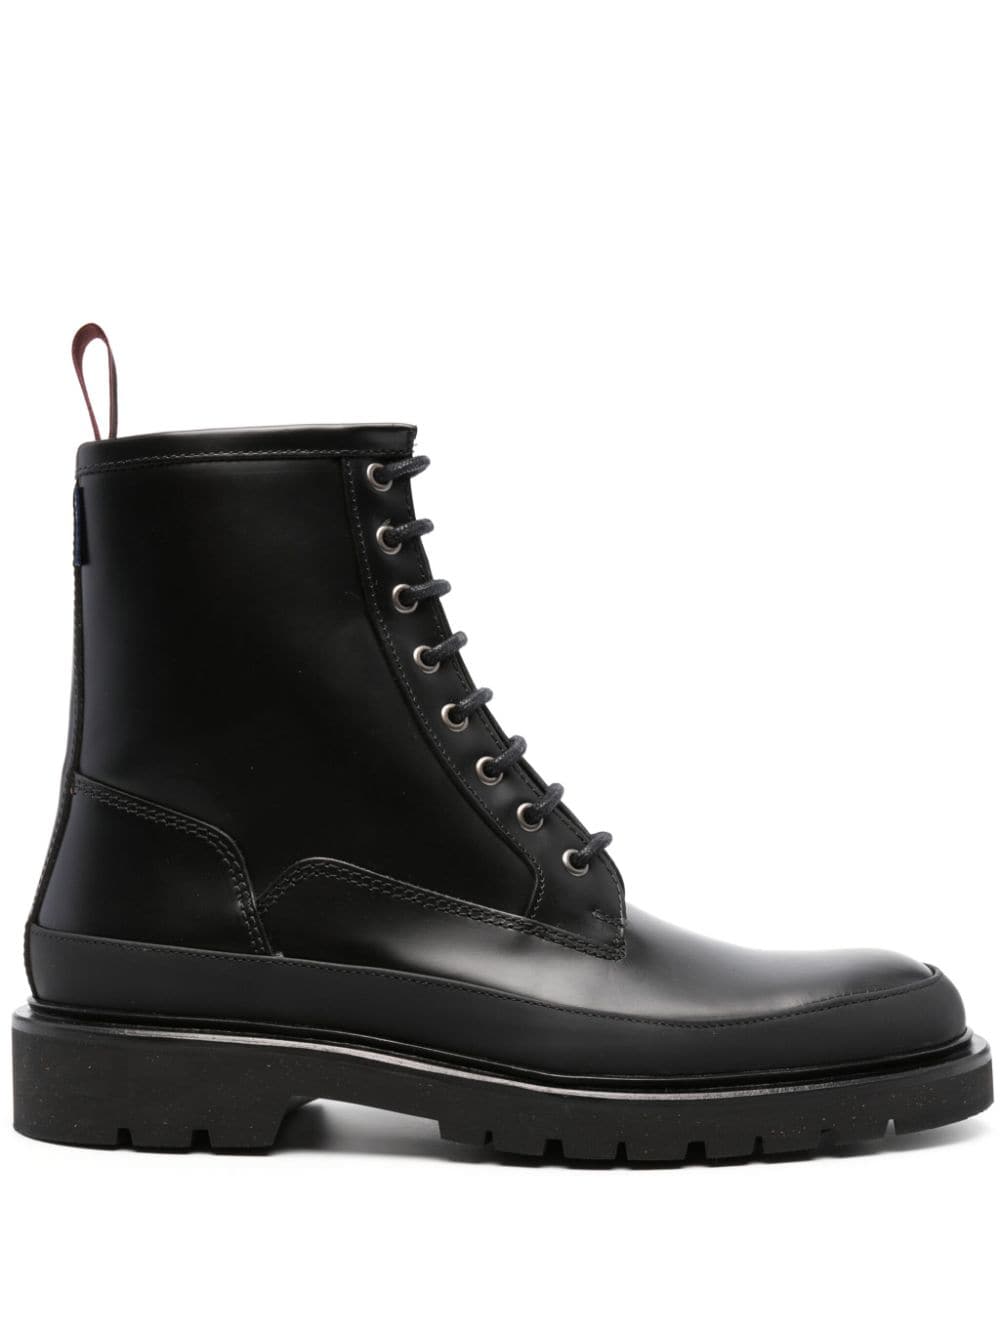 PS Paul Smith logo-tag leather boots - Black von PS Paul Smith